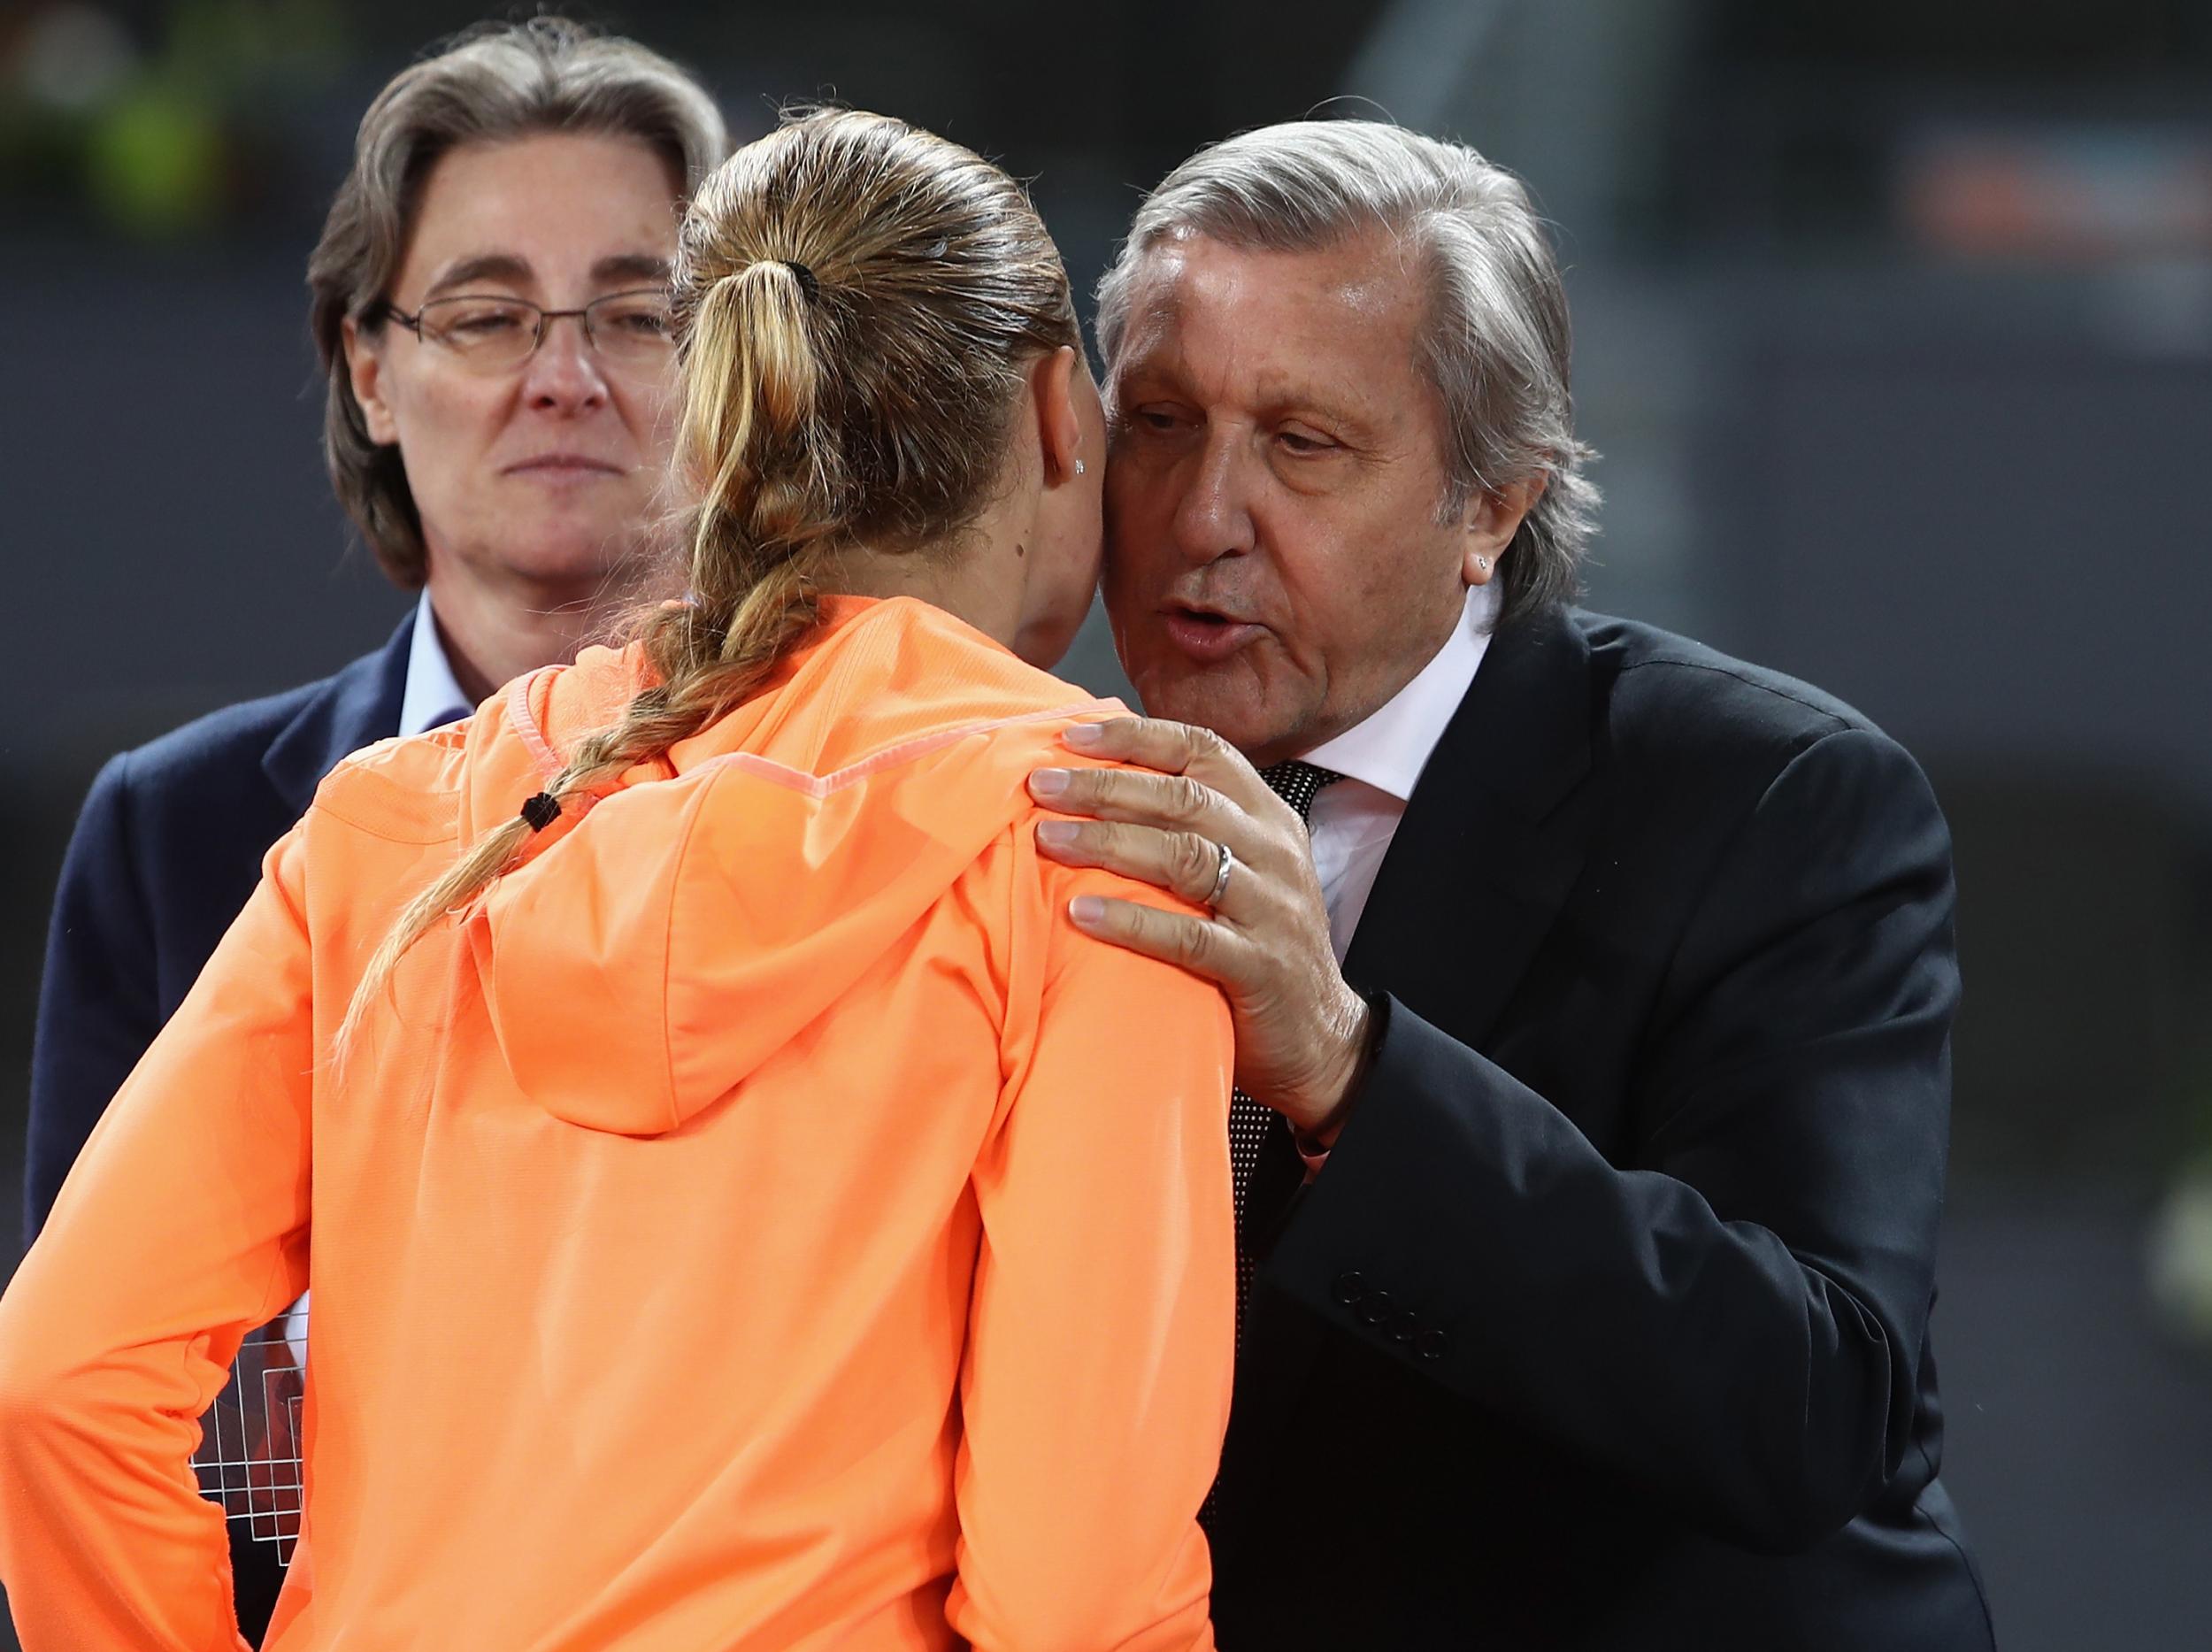 Nastase has 21-days to appeal